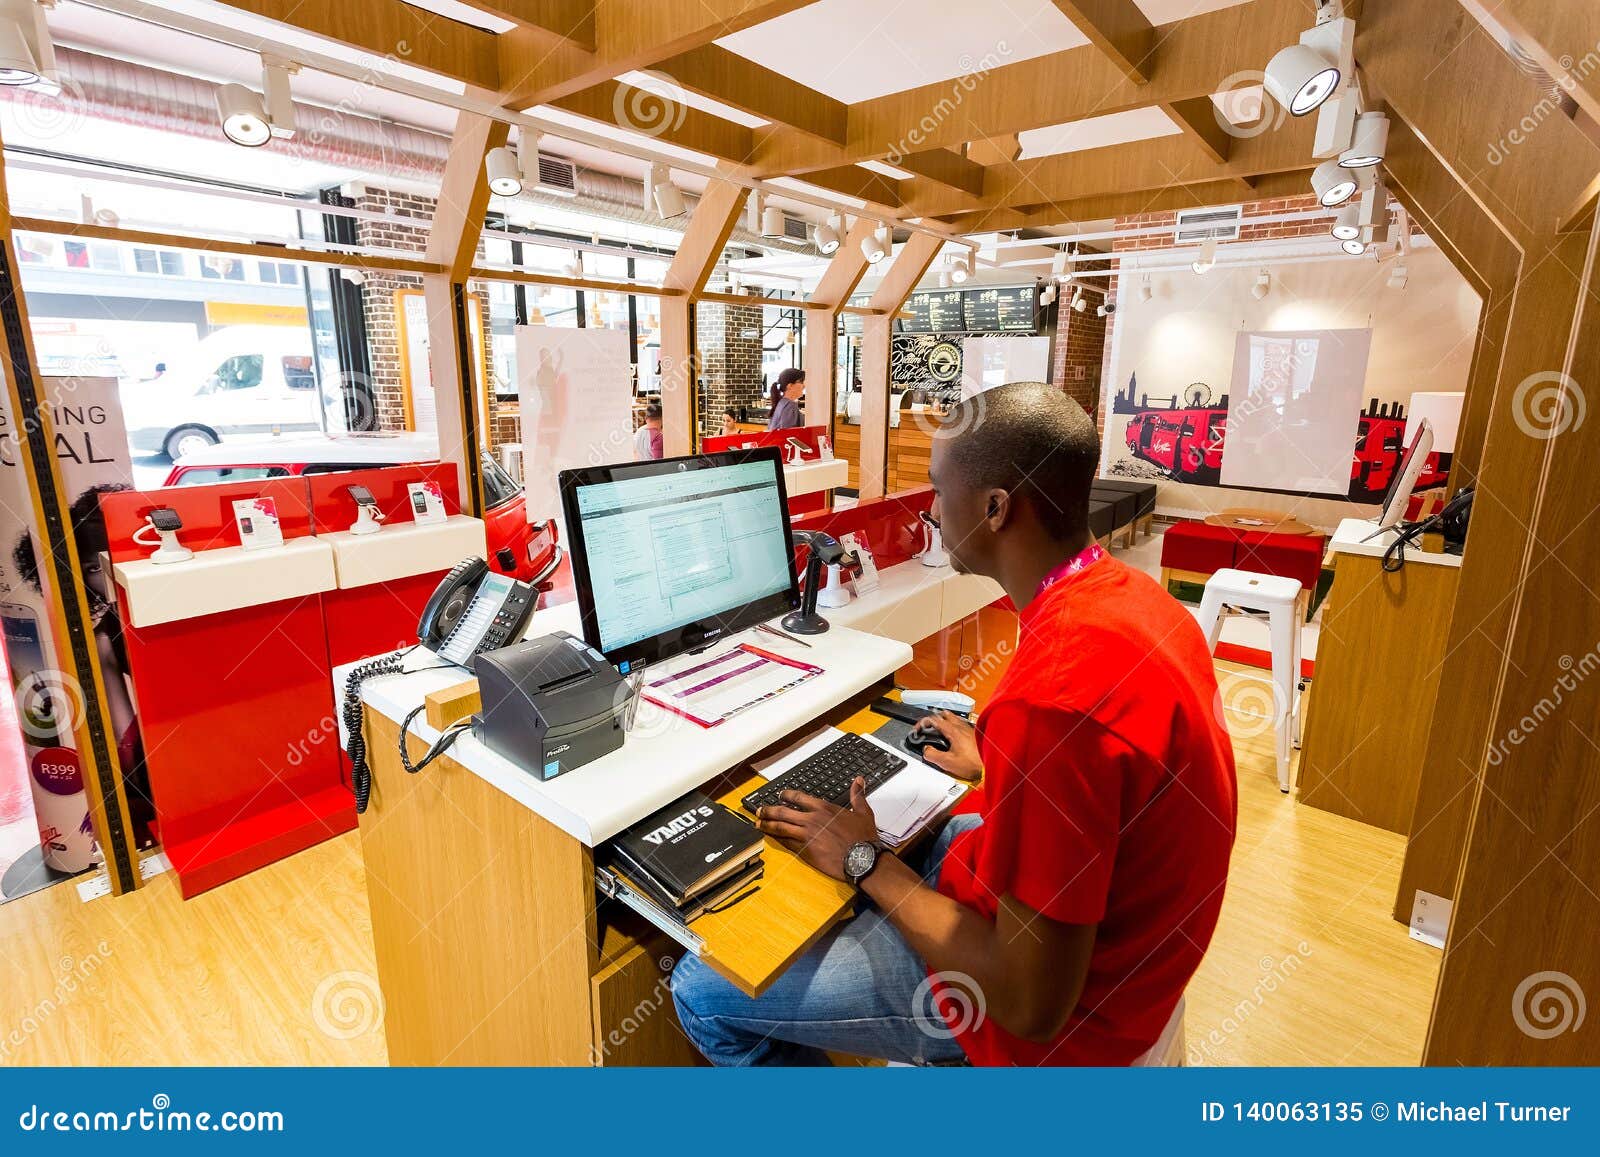 Inside Interior Of A Virgin Mobile Store Editorial Image Image